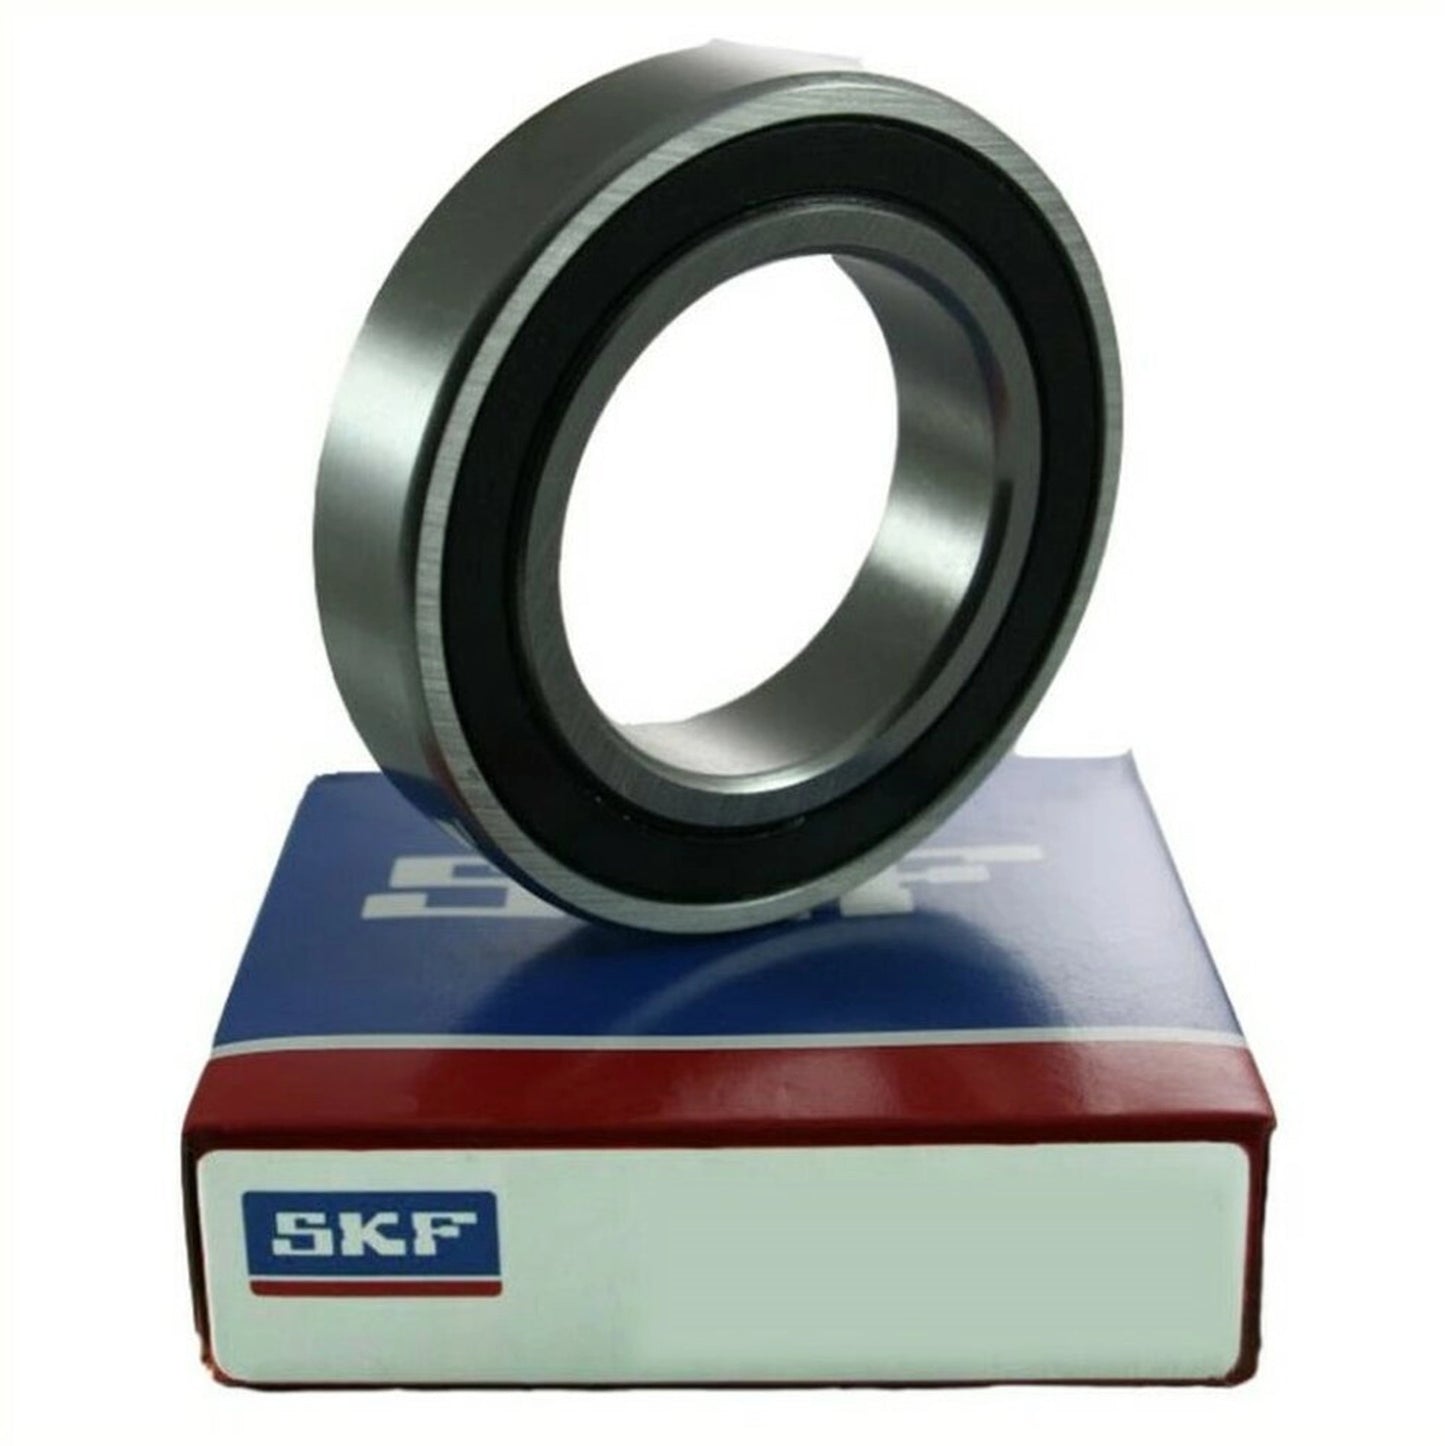 Lager 6206-2RS1 / C3 30x62x16 SKF